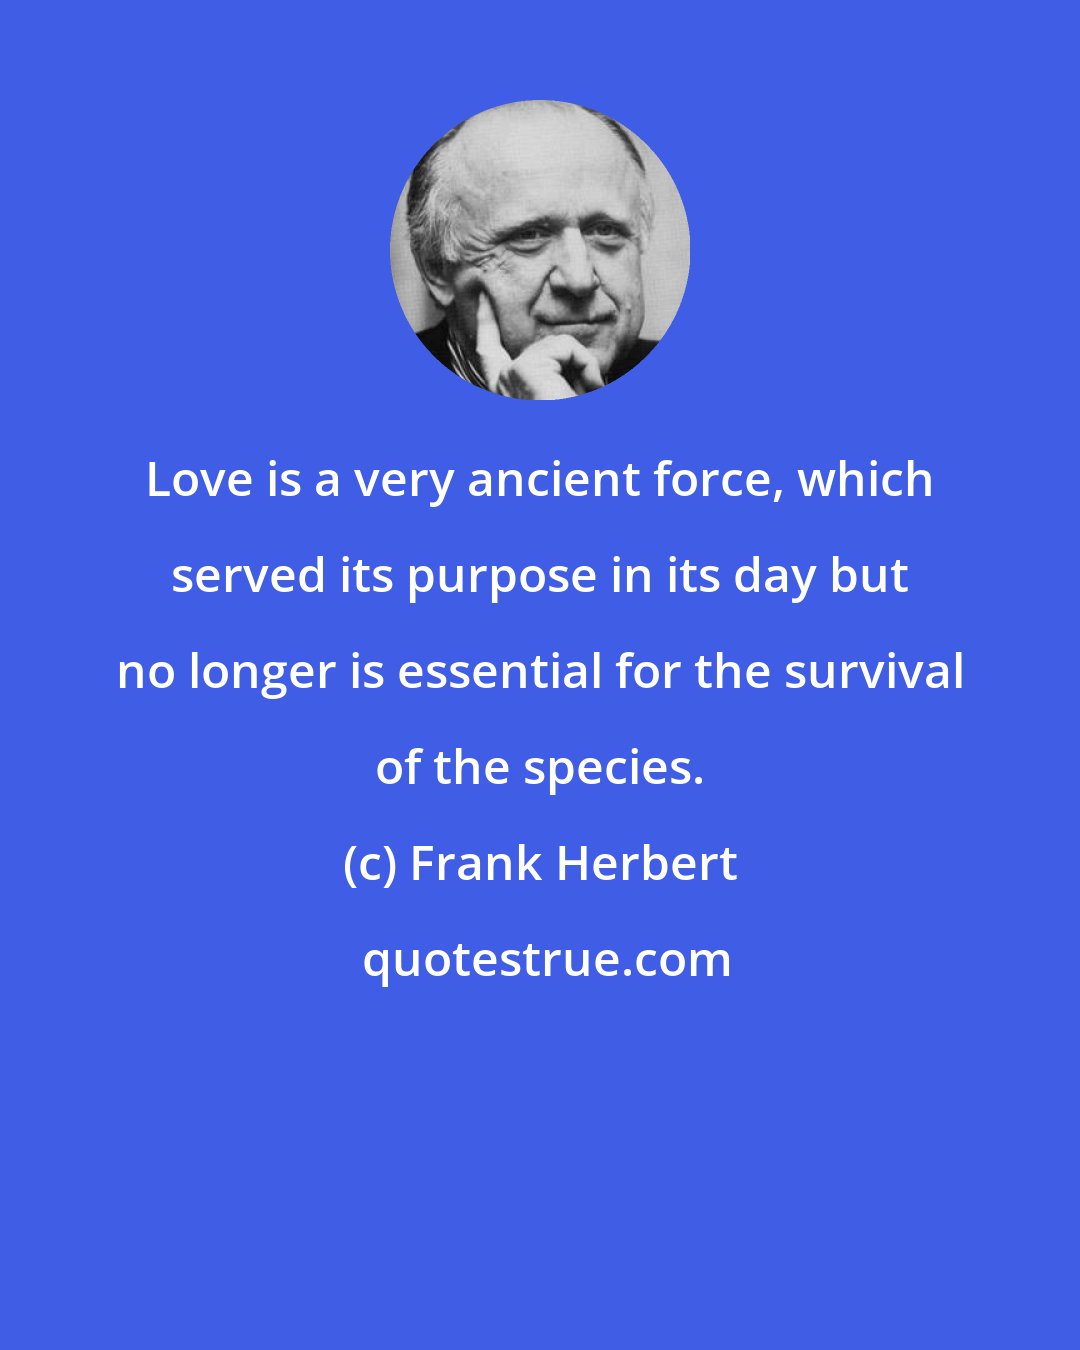 Frank Herbert: Love is a very ancient force, which served its purpose in its day but no longer is essential for the survival of the species.